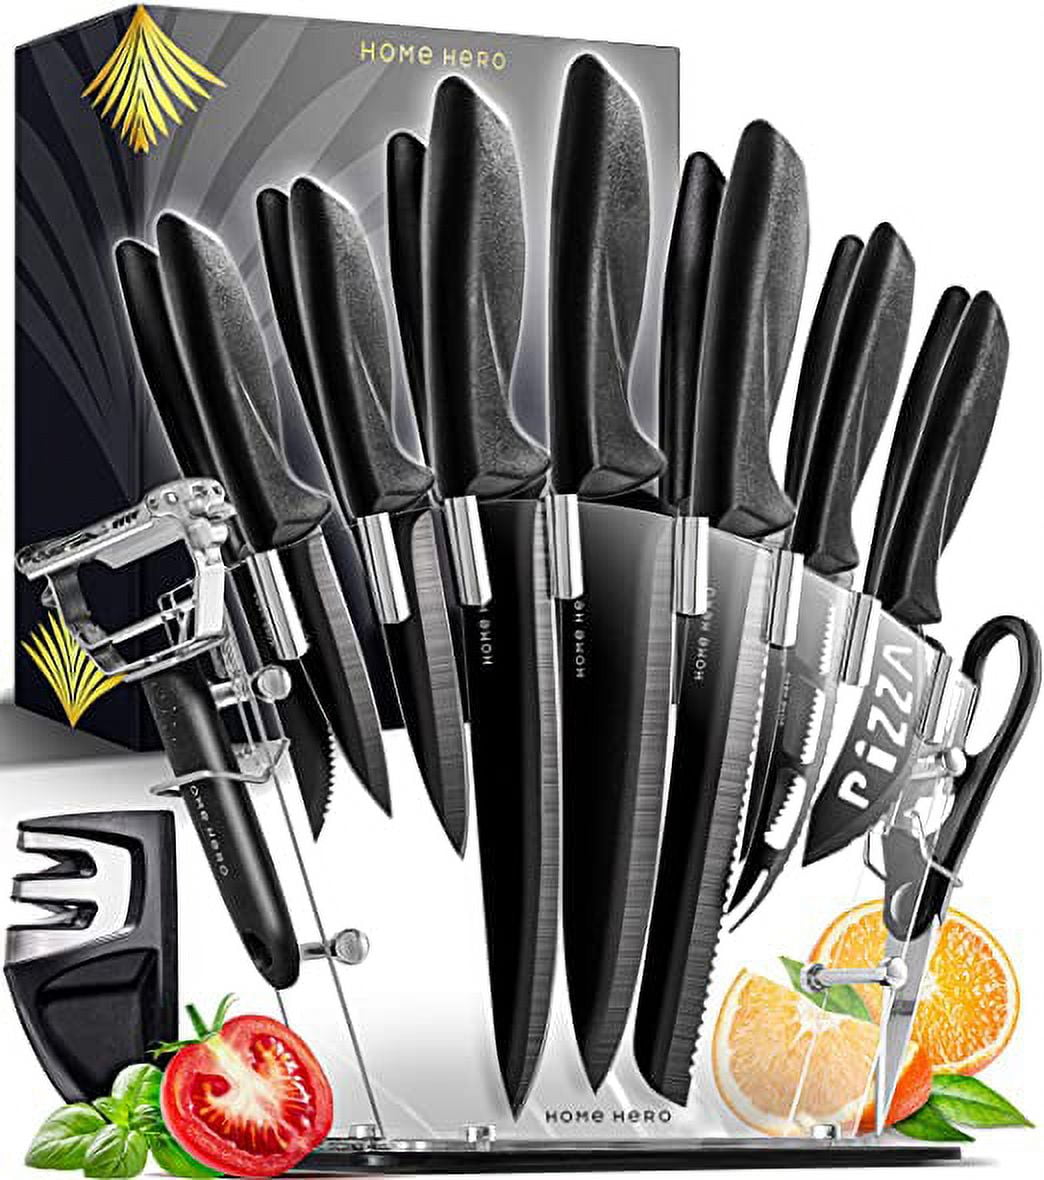 PrinChef Knife Set, 19 Pcs Rust Proof Knives Set for Kitchen, with Acrylic Stand, Sharpener, Scissors and Peeler, Stainless Steel Knife Sets with